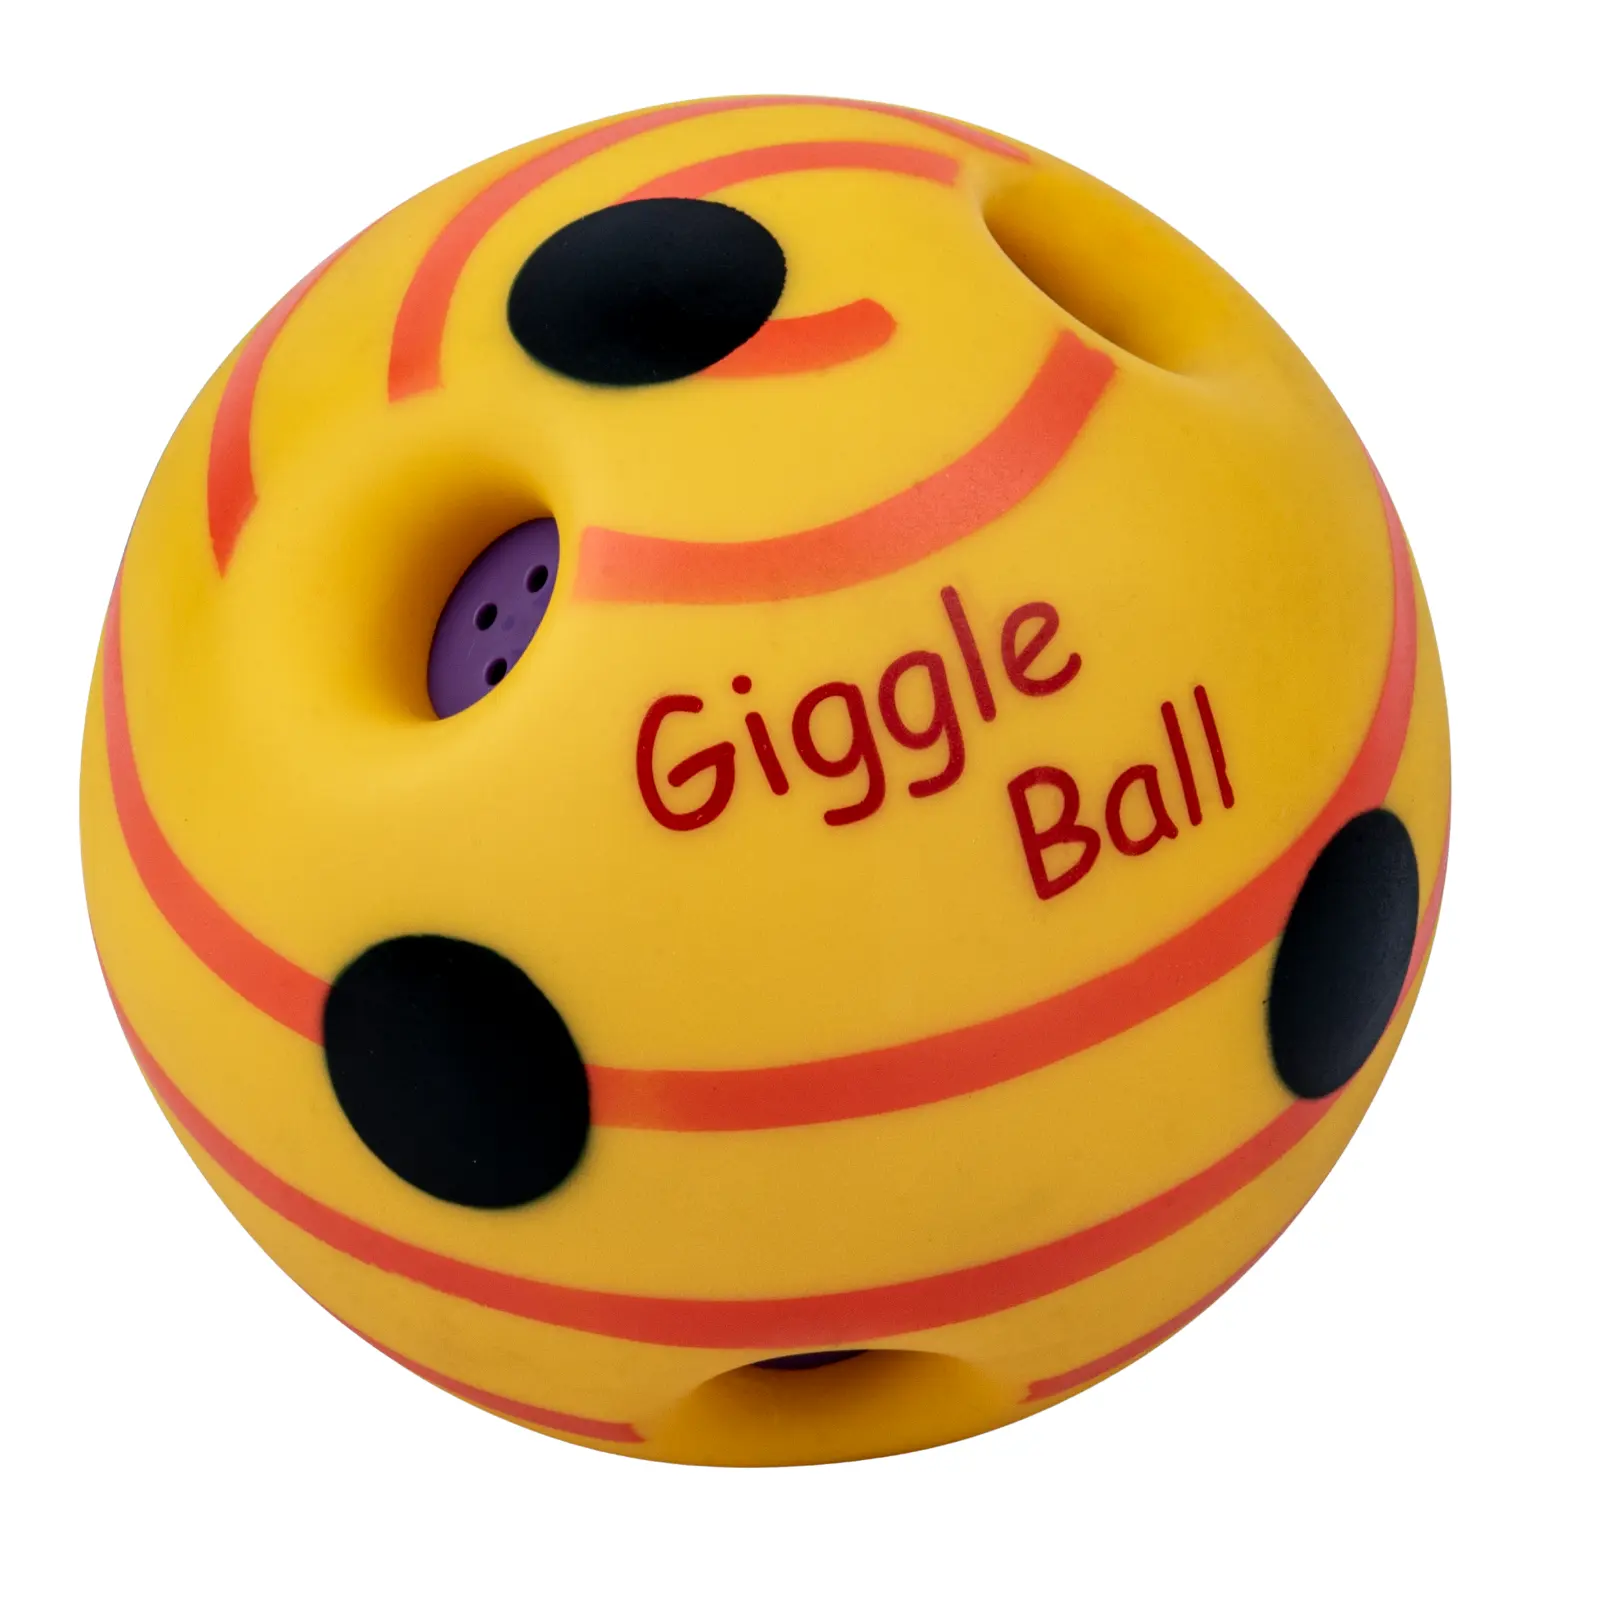 Amazon Hot Sale Giggle Ball Interactive Dog Toy Increases IQ Giggle Sounds When Rolled Or Shaken Chew Toy